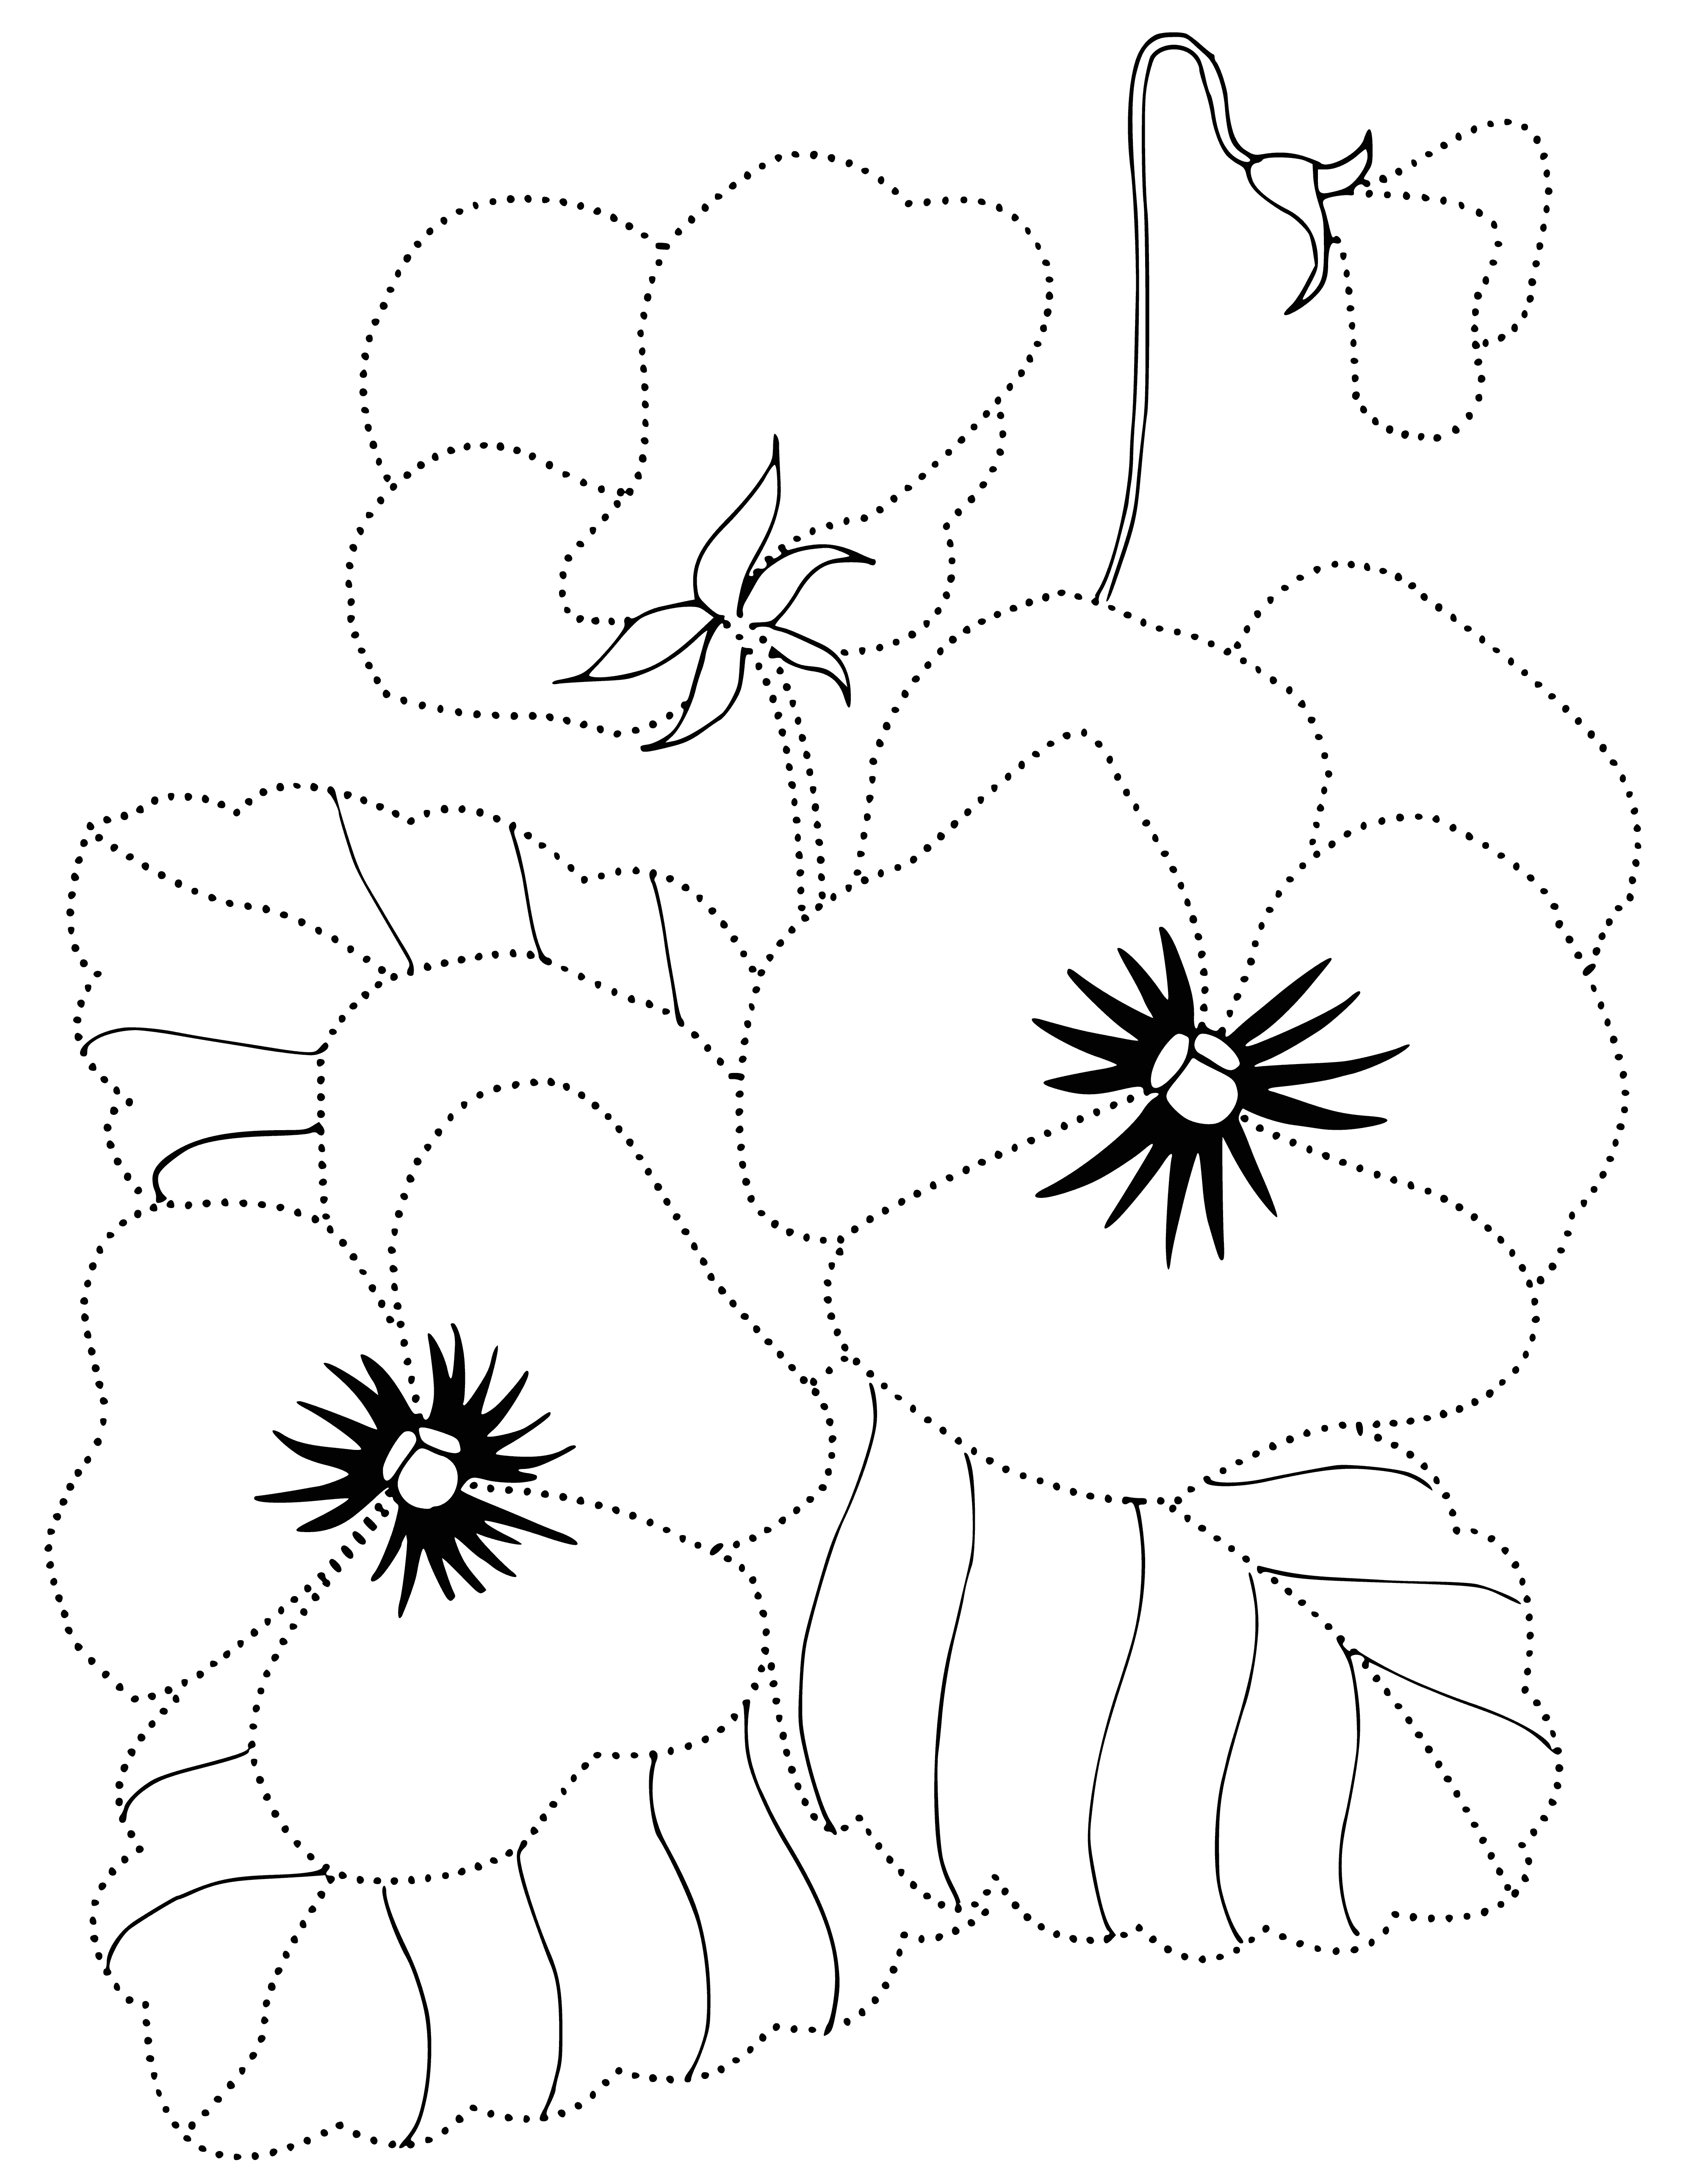 coloring page: Vividly colored flowers in profile, petals lightening to ruffled edges, feat. yellow stamen & sharply-toothed deep green leaves.